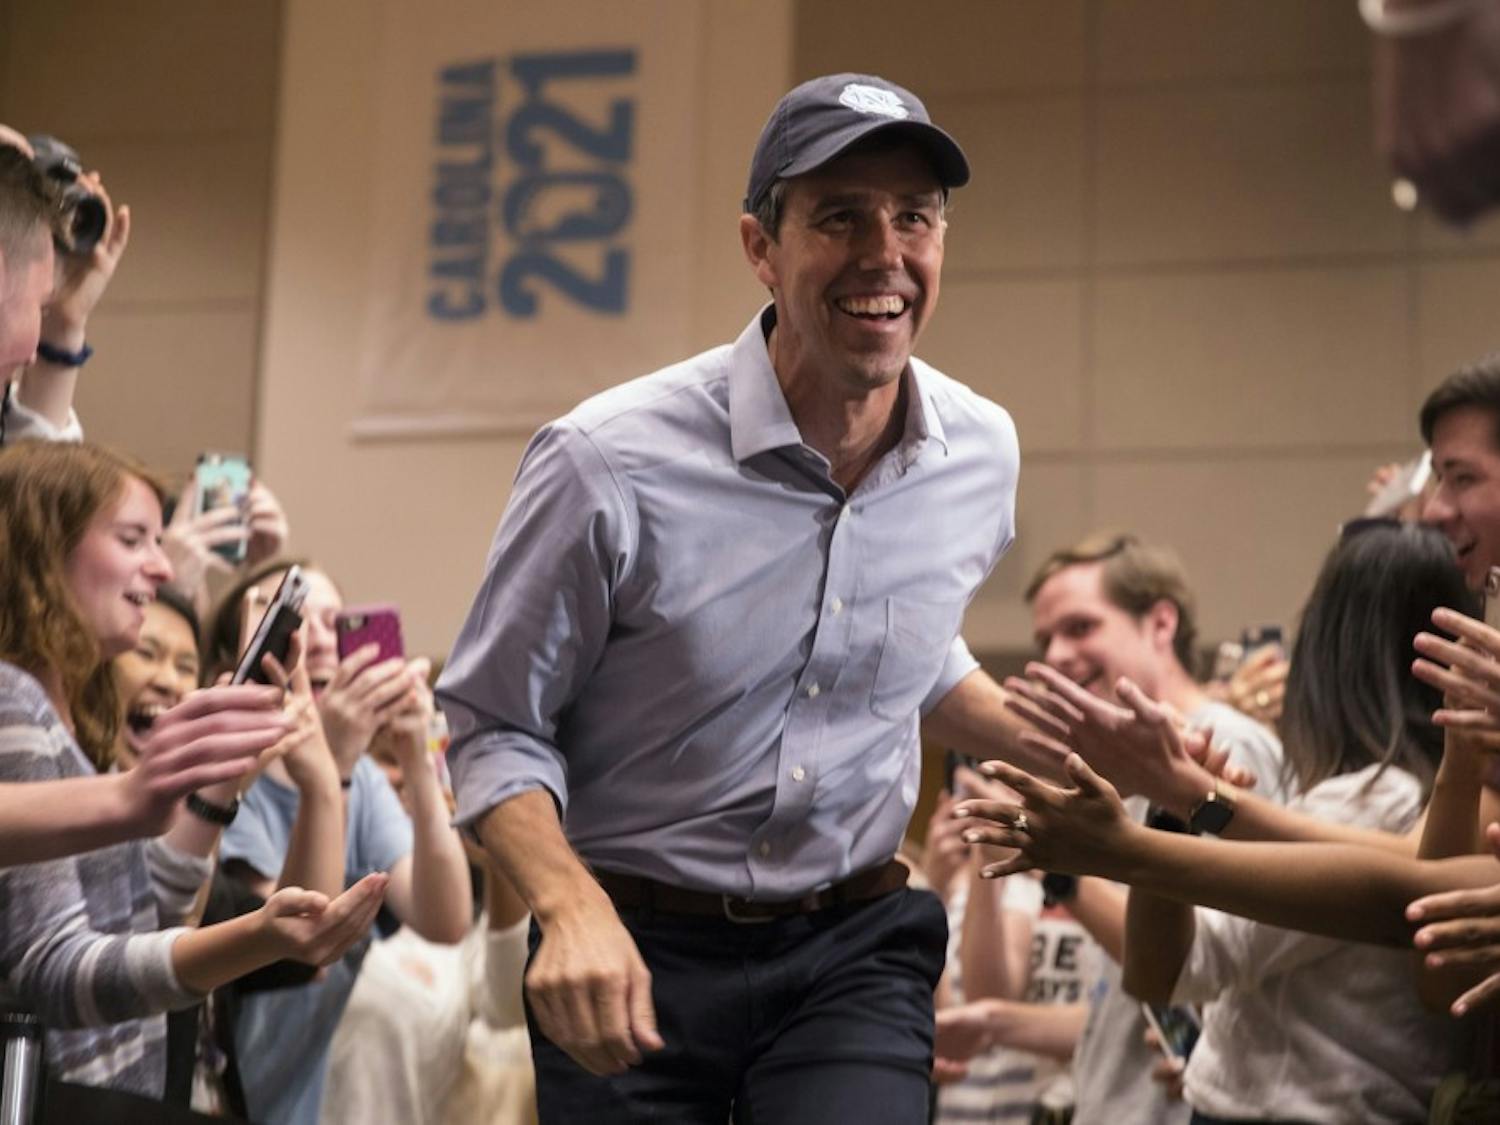 Democratic presidential candidate Beto O'Rourke visits UNC-Chapel Hill on Monday, April 15, 2019 in the Great Hall of the Student Union. The event was hosted by UNC Young Democrats.&nbsp;